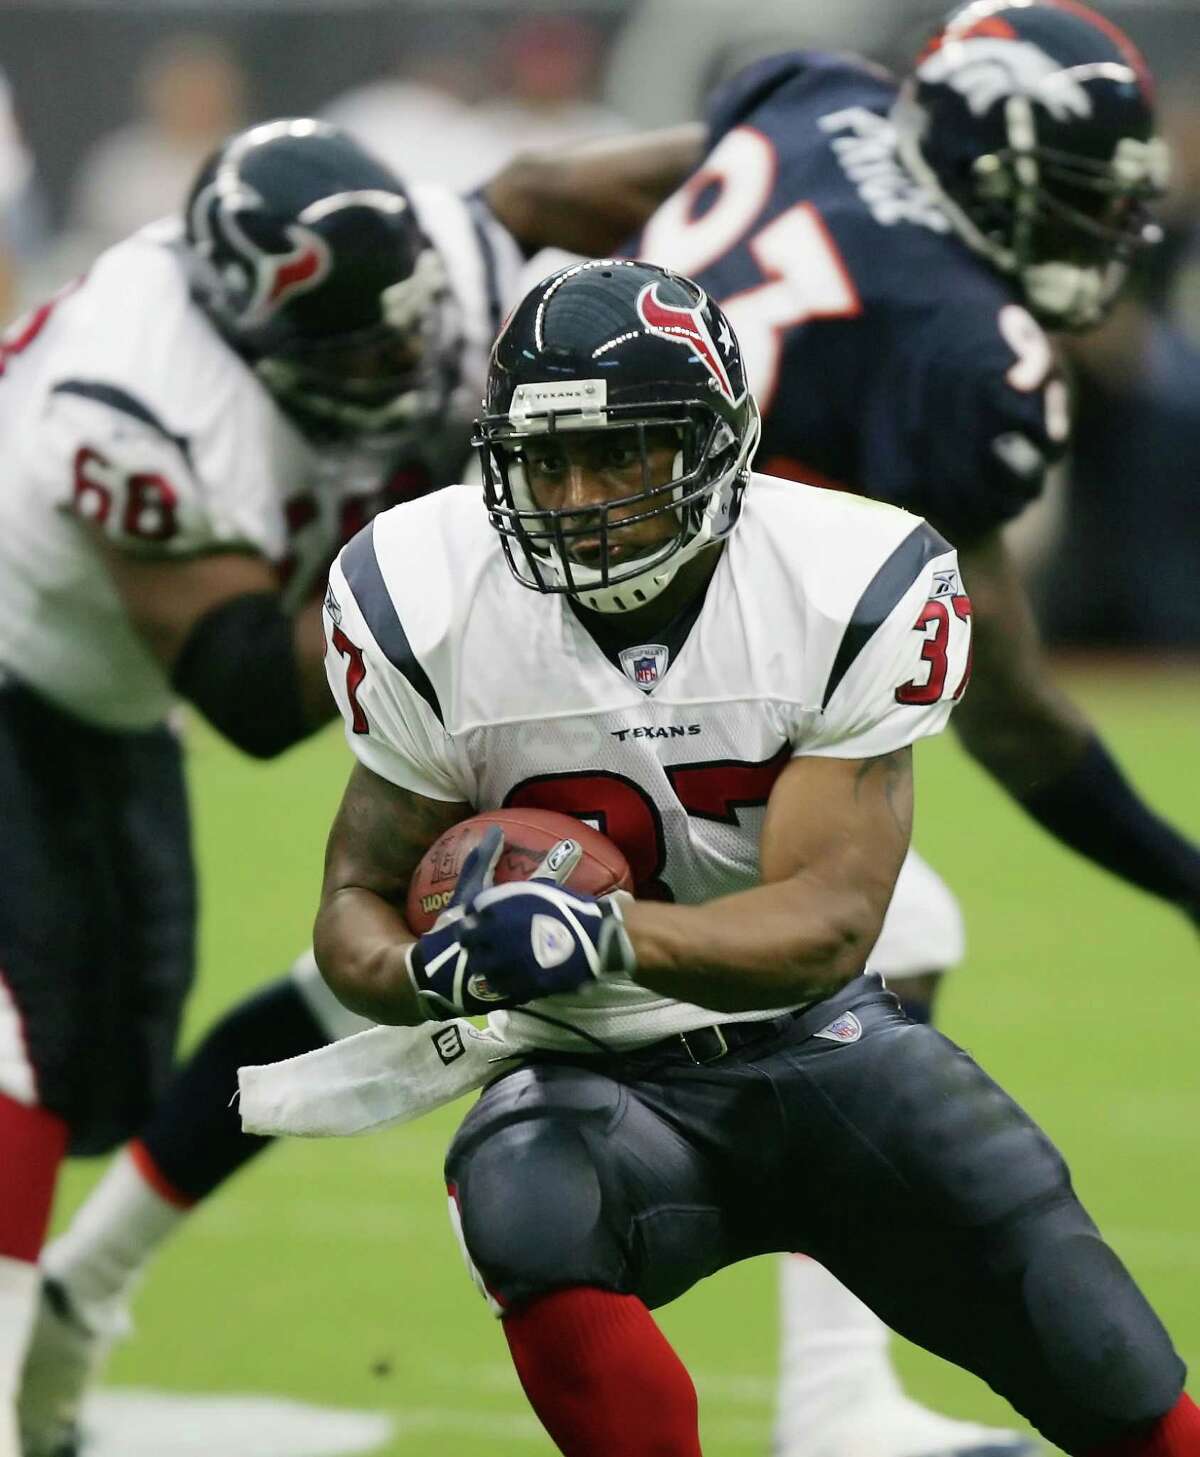 Houston Texans running back Domanick Davis, front, runs for a gain during the first quarter of a preseason game against the Denver Broncos, Aug. 13, 2005, in Houston. After rushing for more than 1,000 yards in each of his first two professional seasons, the Texans scrapped his rookie contract and rewarded him with a new, far more lucrative one. But even as he emerges as one of the more productive backs in the league, Davis has remained humble and is determined to do more. (AP Photo/David J. Phillip, File)